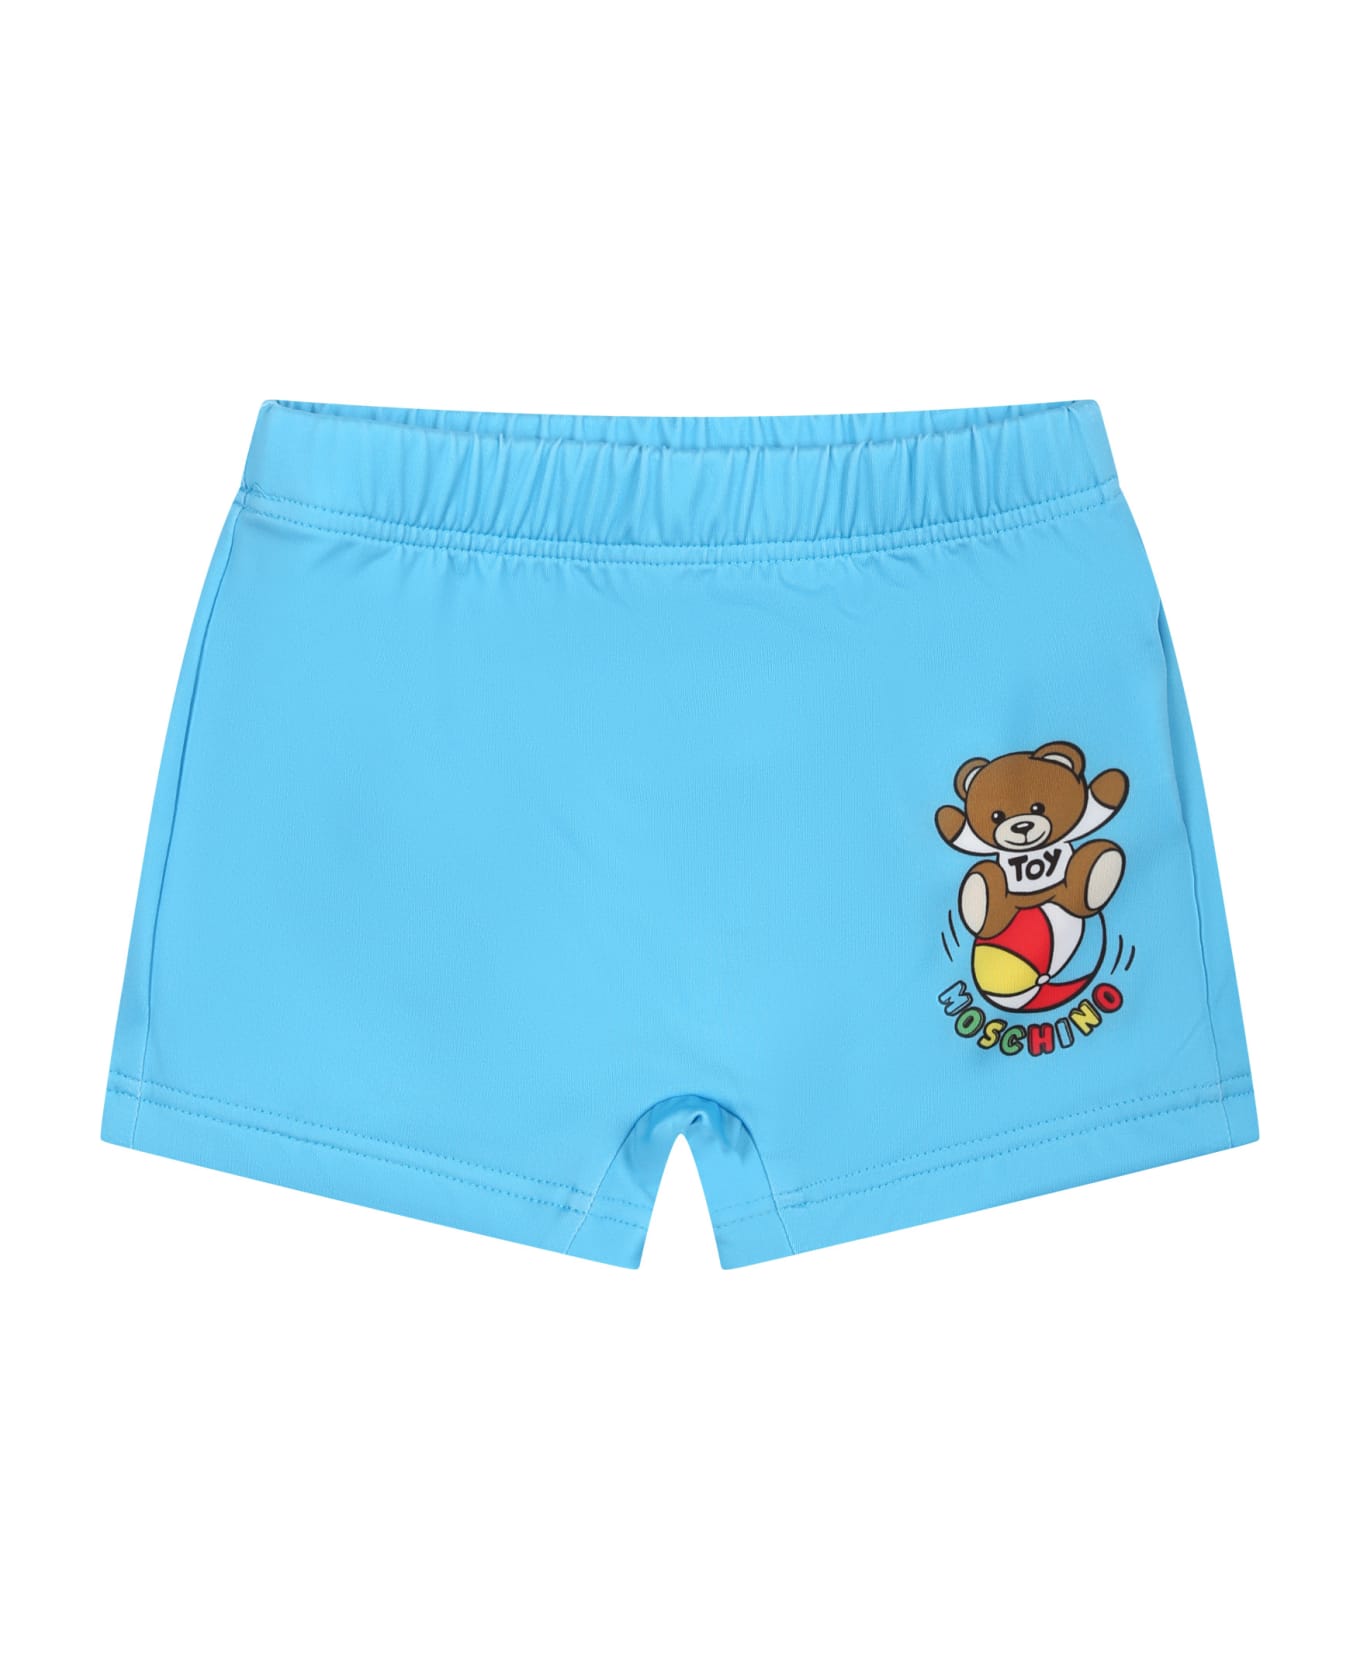 Moschino Light Blue Swimsuit For Baby Boy With Teddy Bear And Multicolor Logo - Light Blue